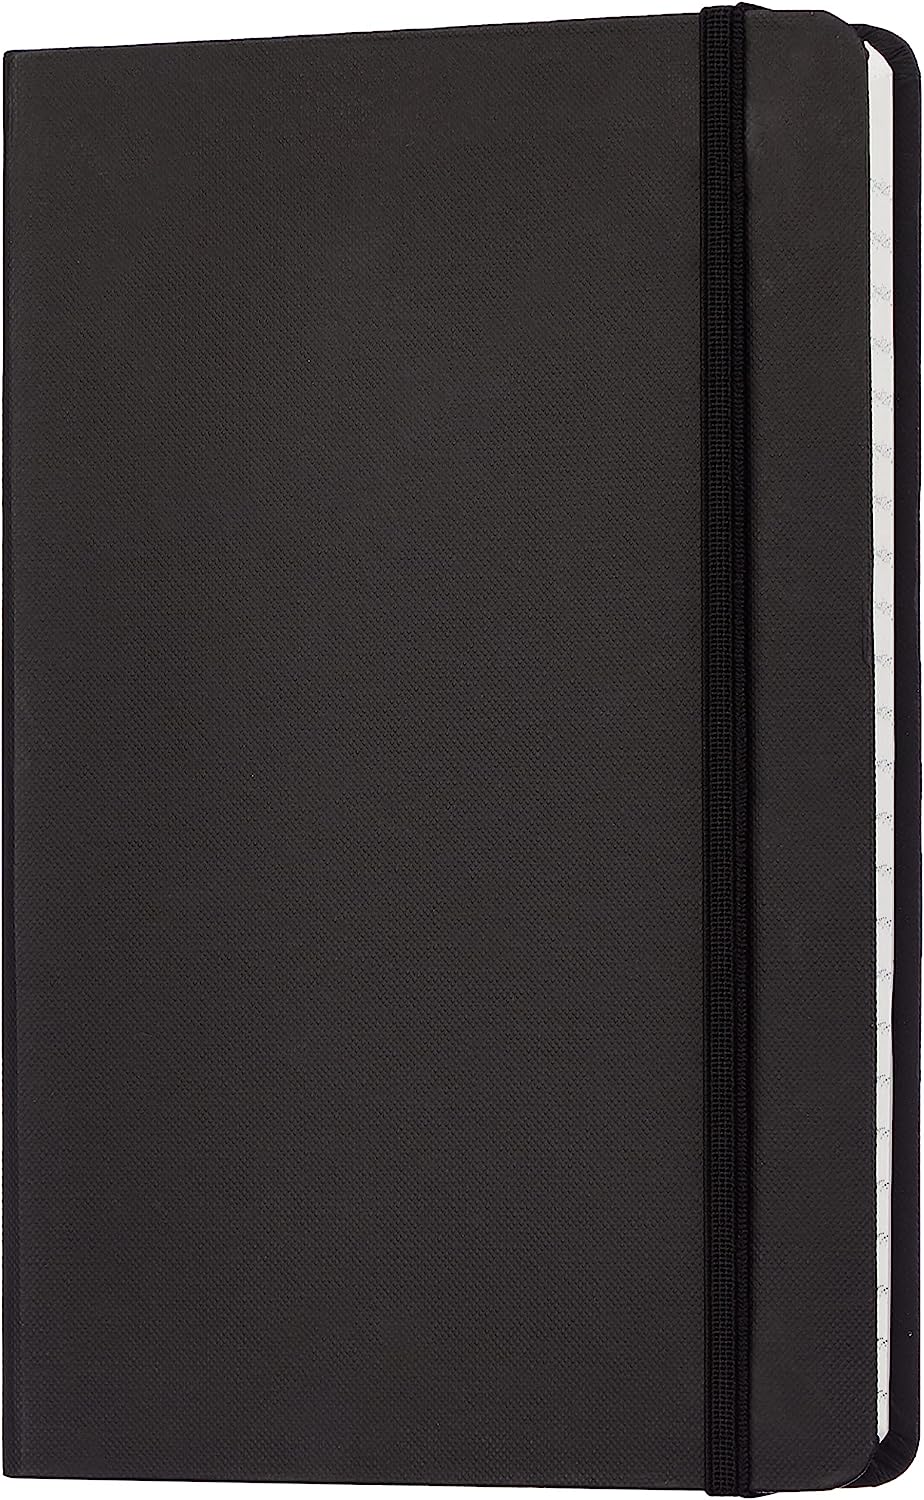 Amazon Basics Classic Notebook, Line Ruled, 240 Pages, [...]